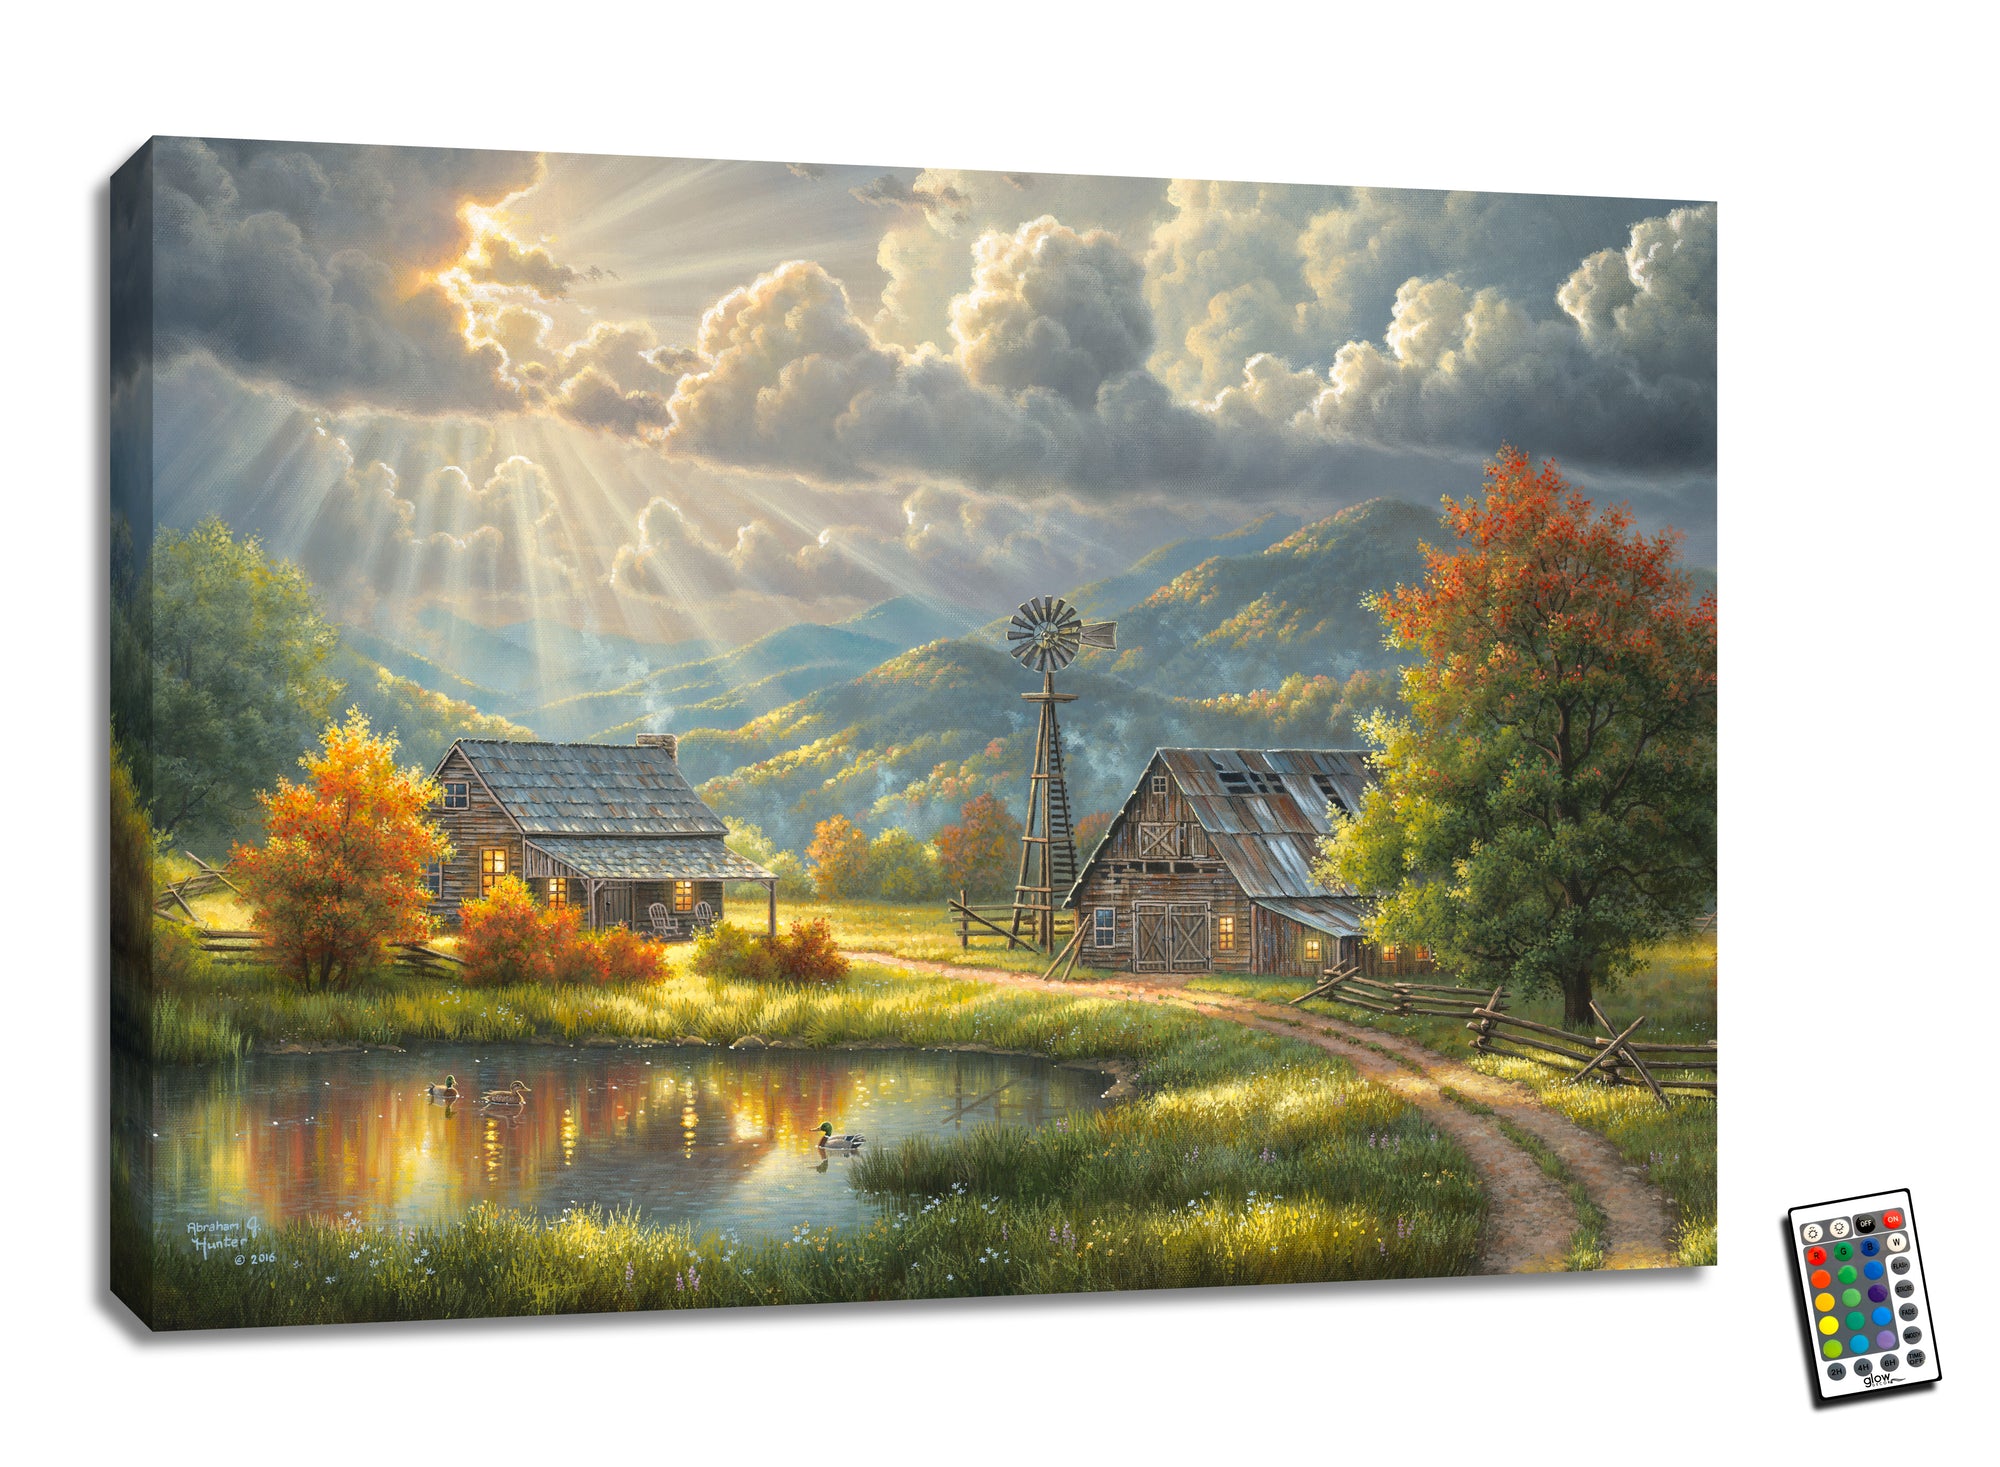 Introducing the breathtaking God Shed His Grace 18x24 Fully Illuminated LED Wall Art - a stunning masterpiece that captures the essence of romance and beauty in every stroke. 